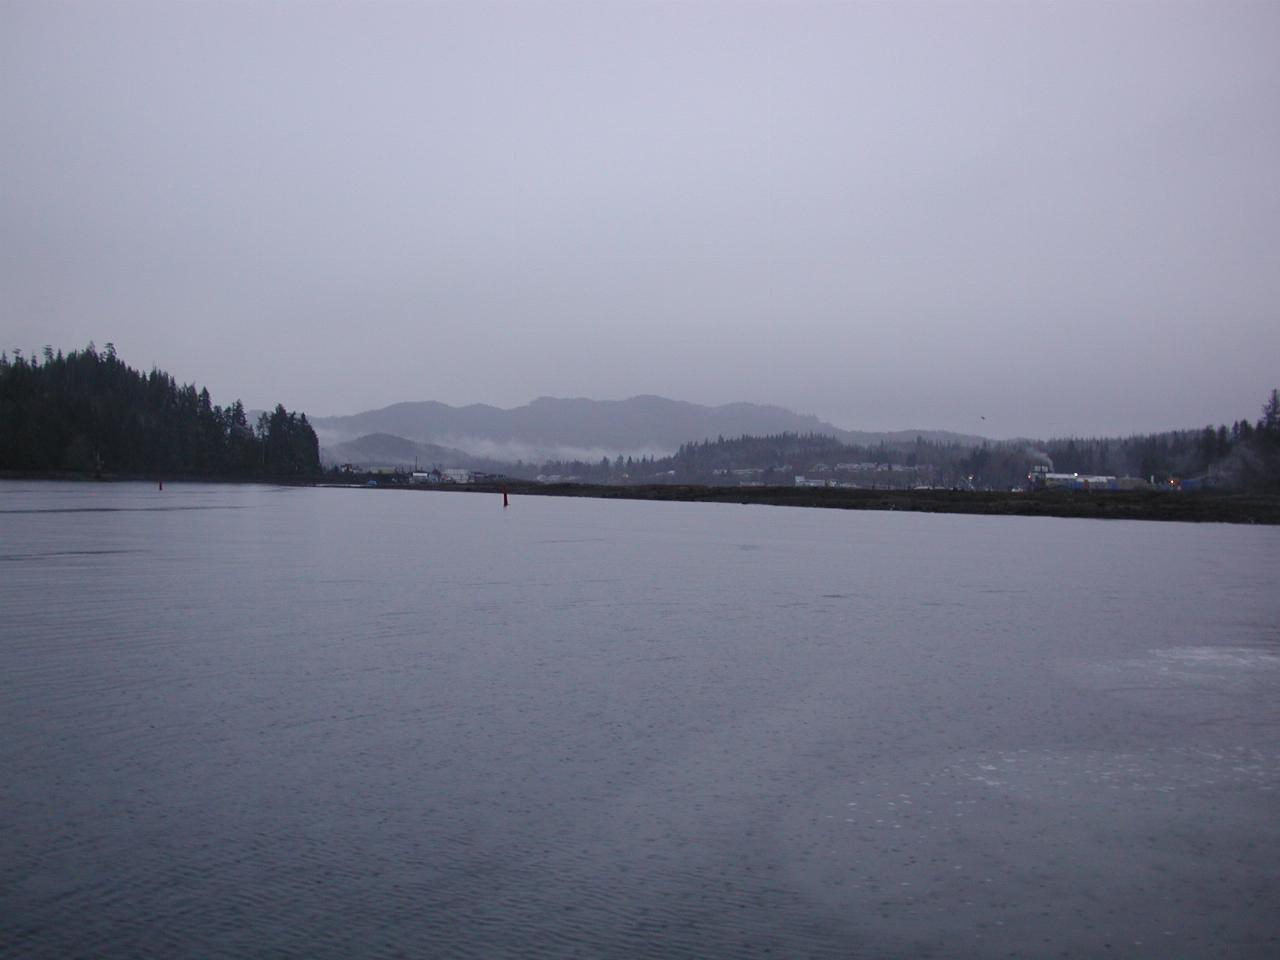 Early morning at Port Hardy, as we try to beat the incoming storm